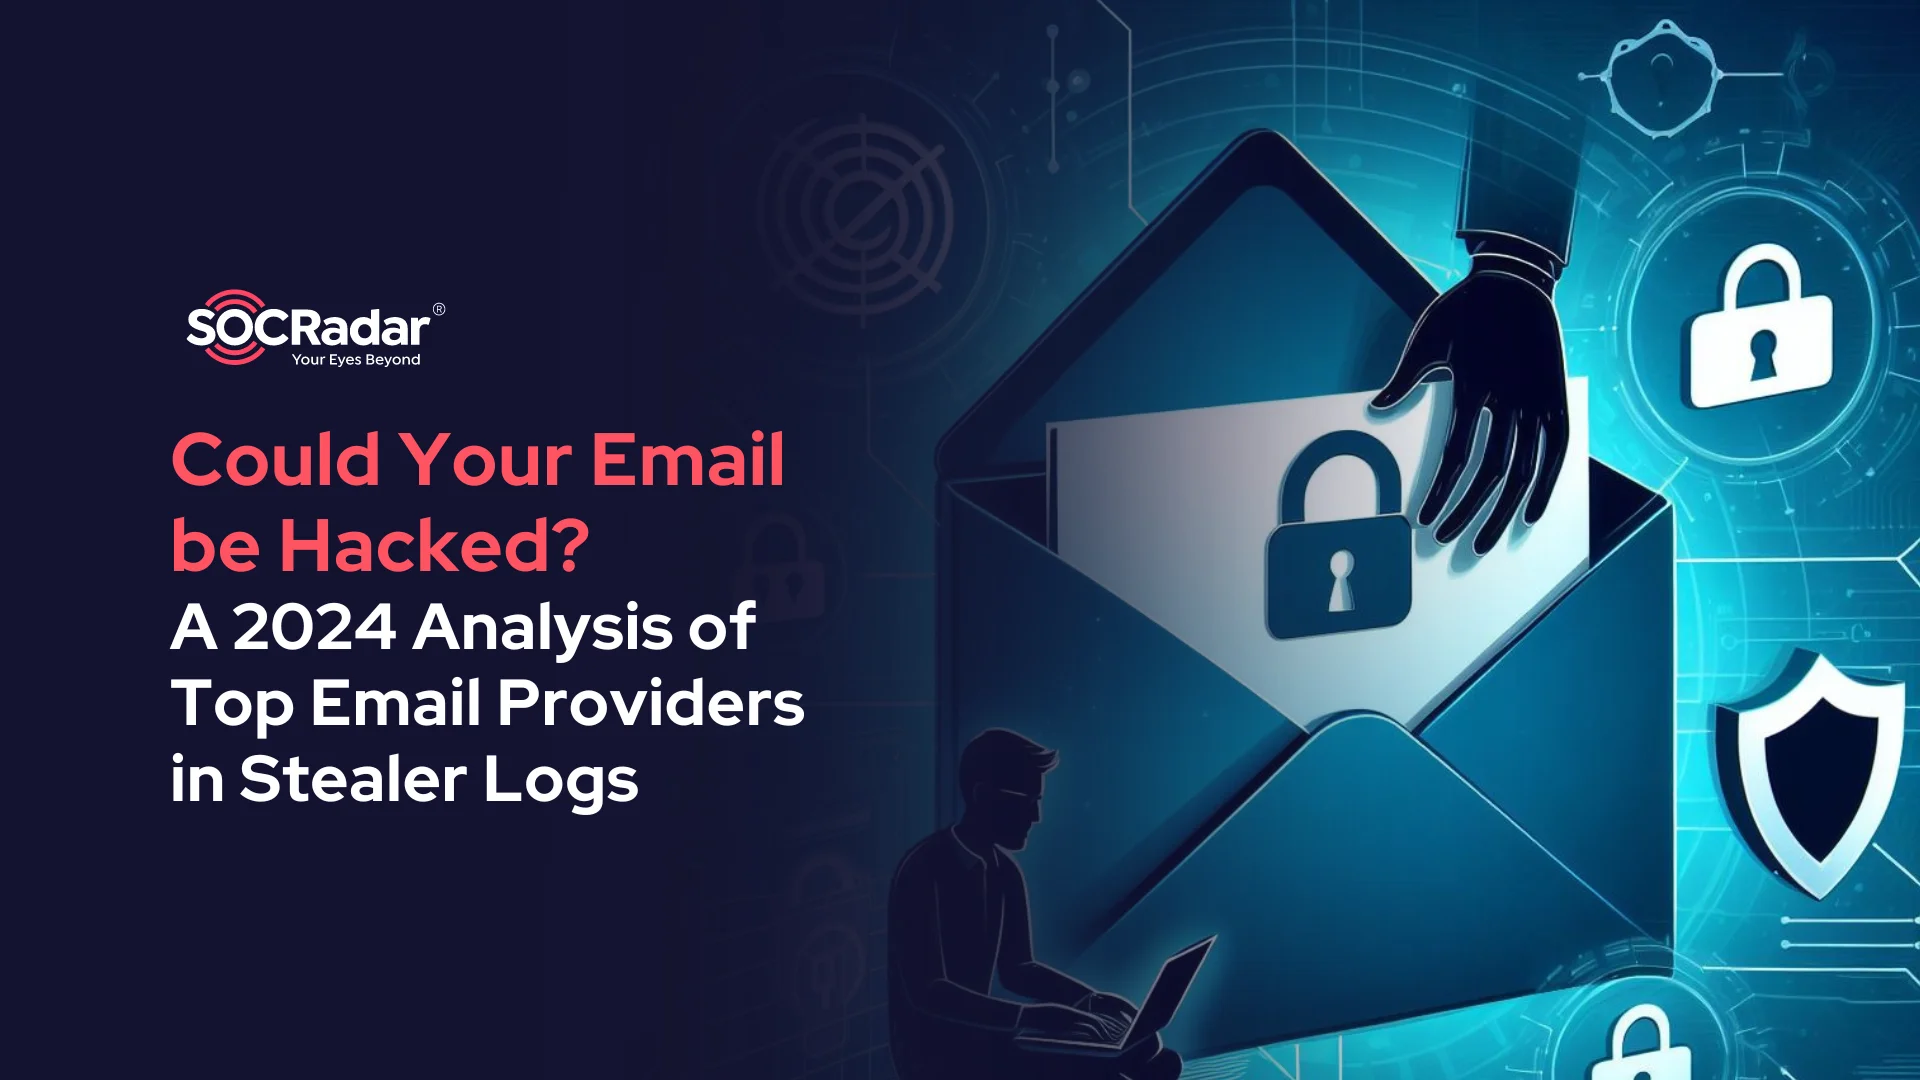 SOCRadar® Cyber Intelligence Inc. | Could Your Email be Hacked? 2024 Analysis of Top Email Providers in Stealer Logs